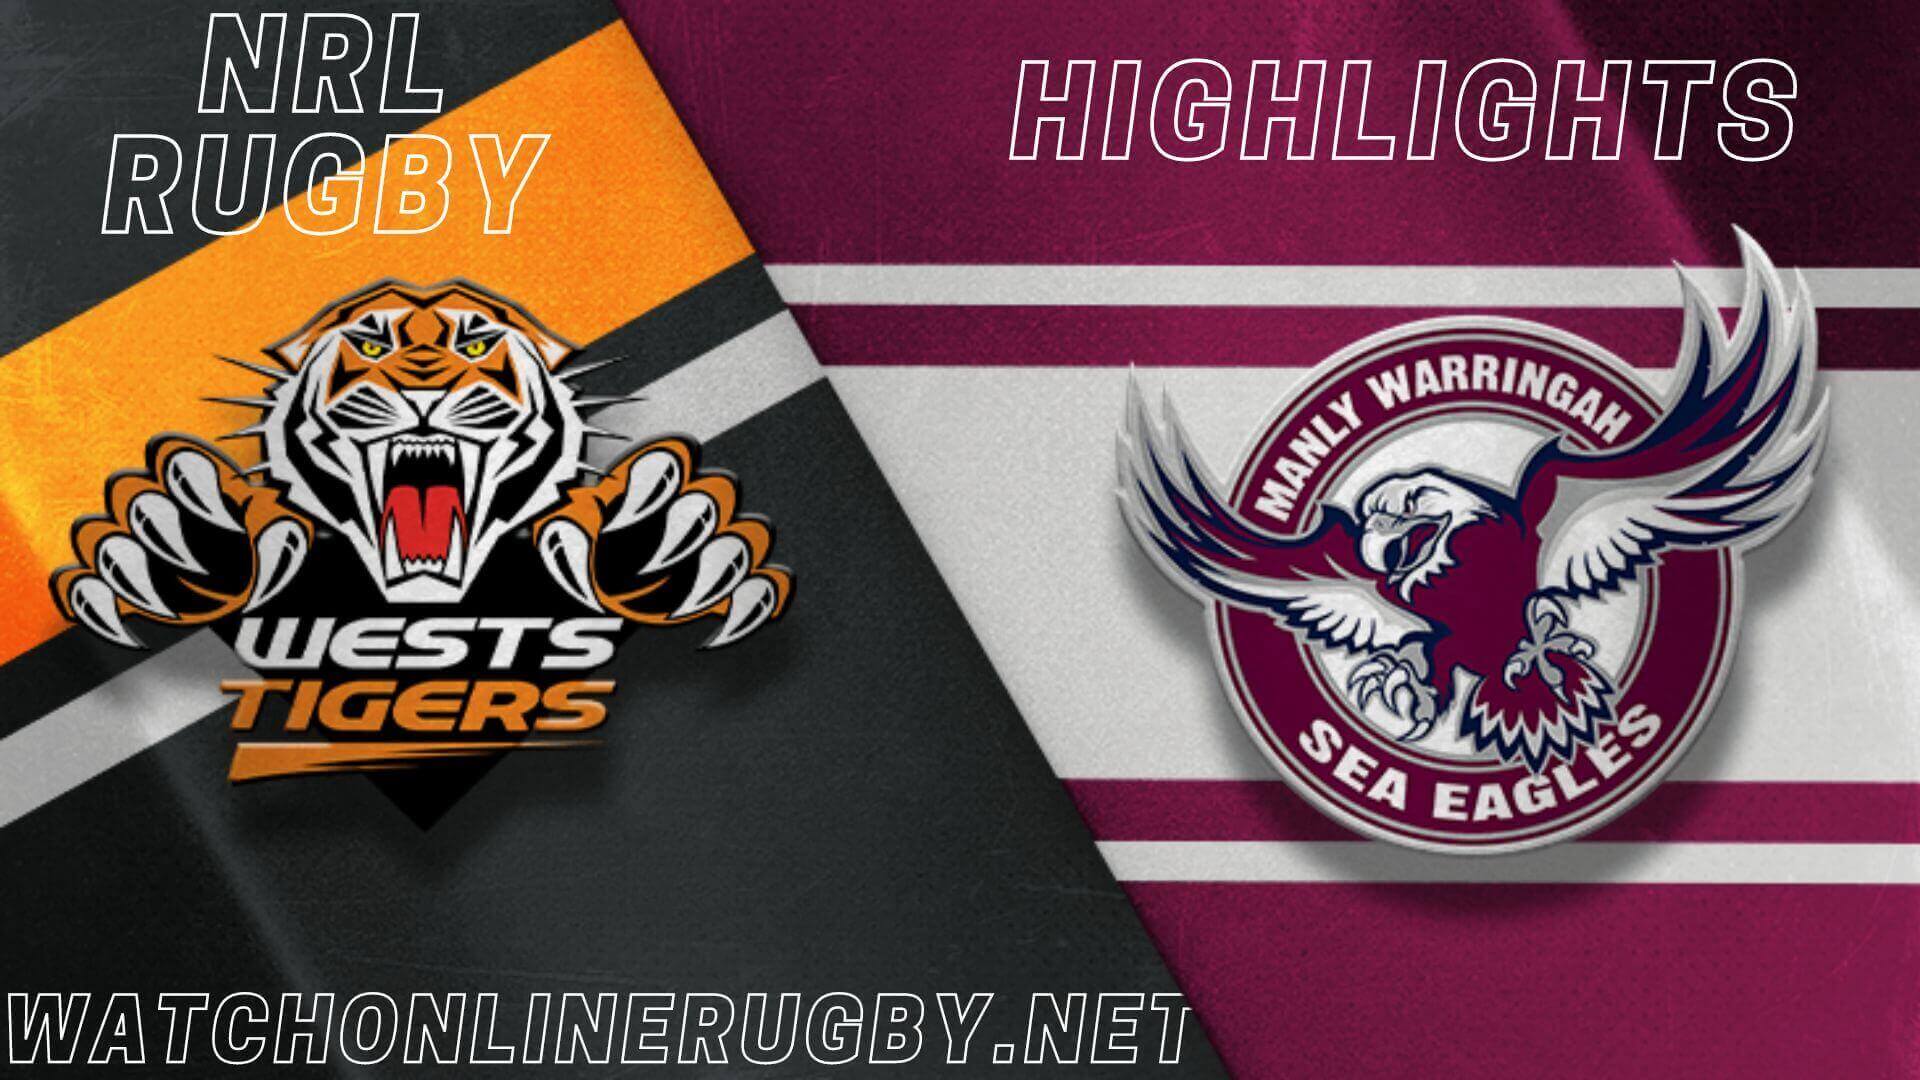 Wests Tigers Vs Sea Eagles Highlights RD 14 NRL Rugby